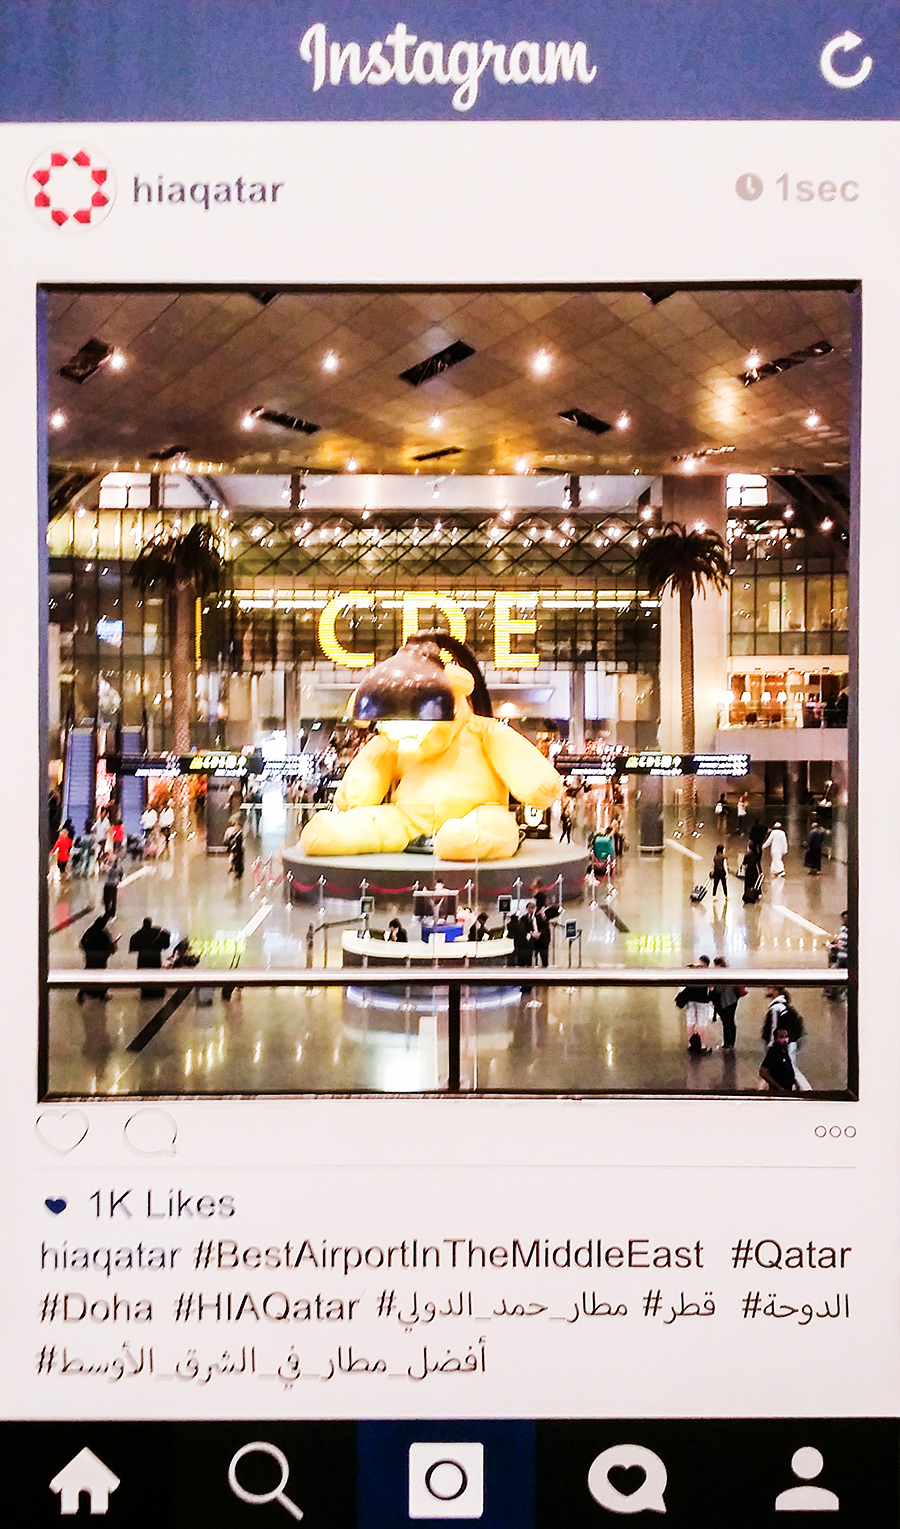 Instagram cutout at the foyer of Hamad International Airpot in Doha, Qatar.